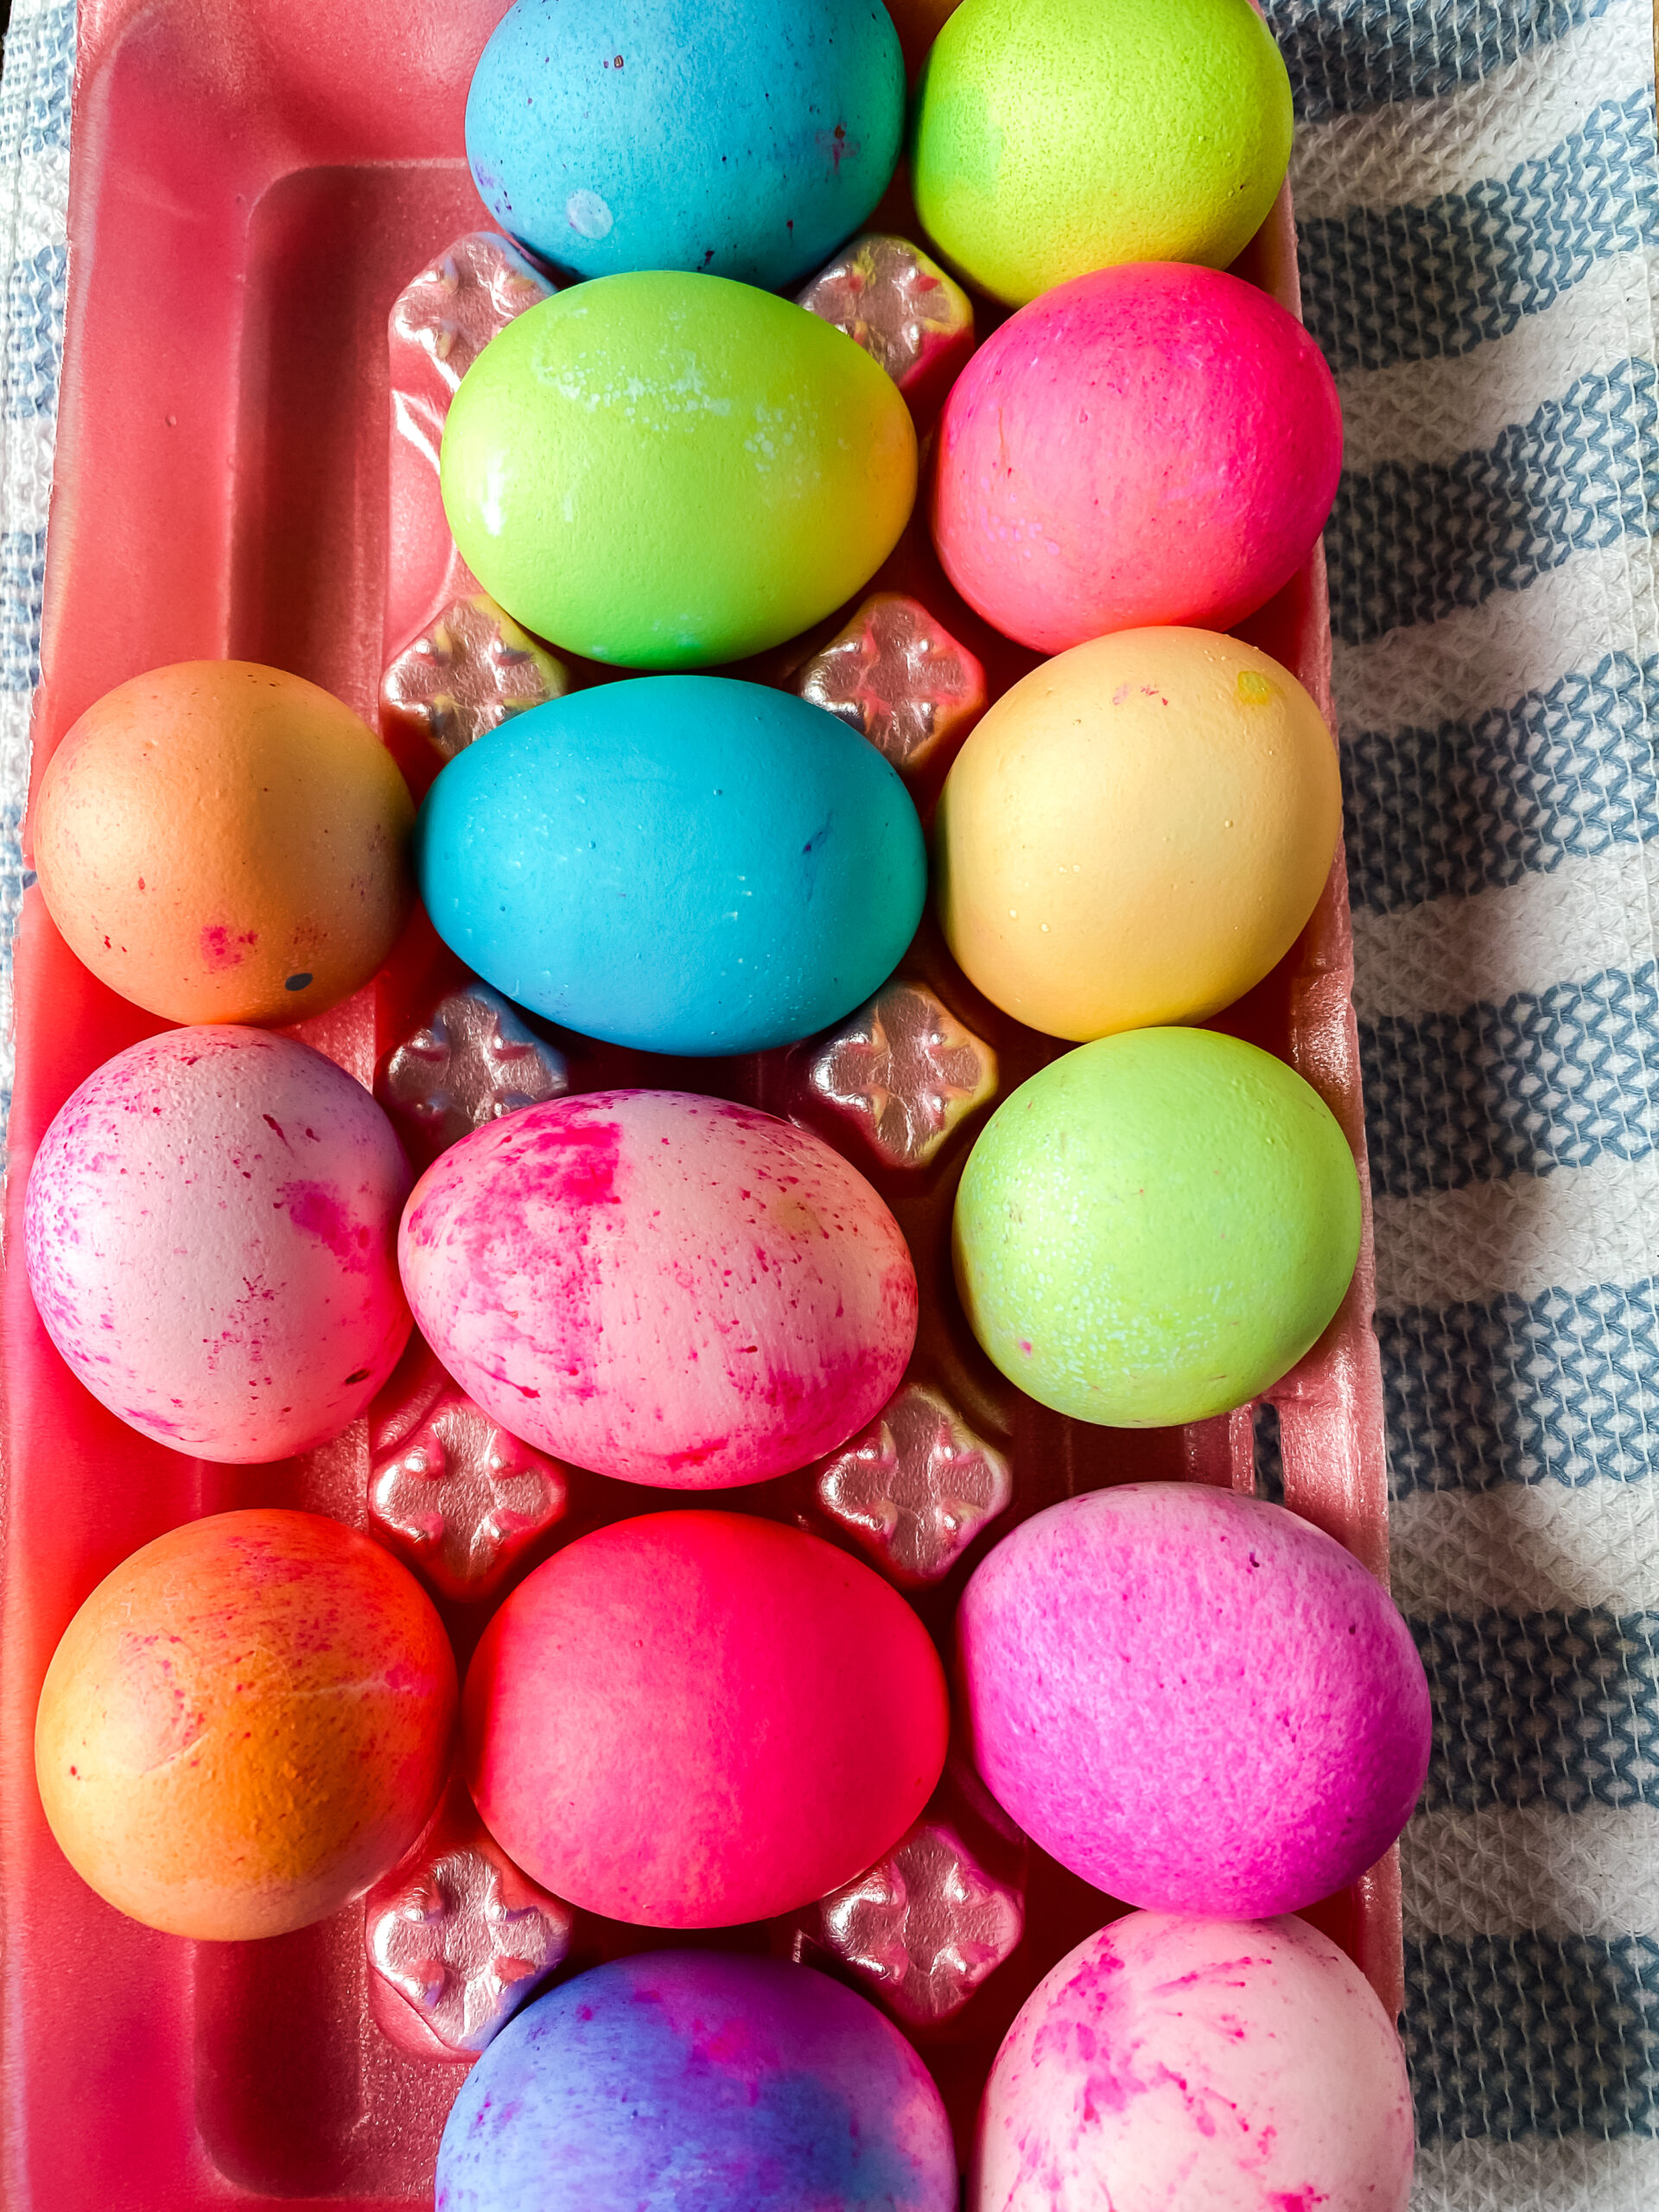 How To Dye Eggs With Food Coloring